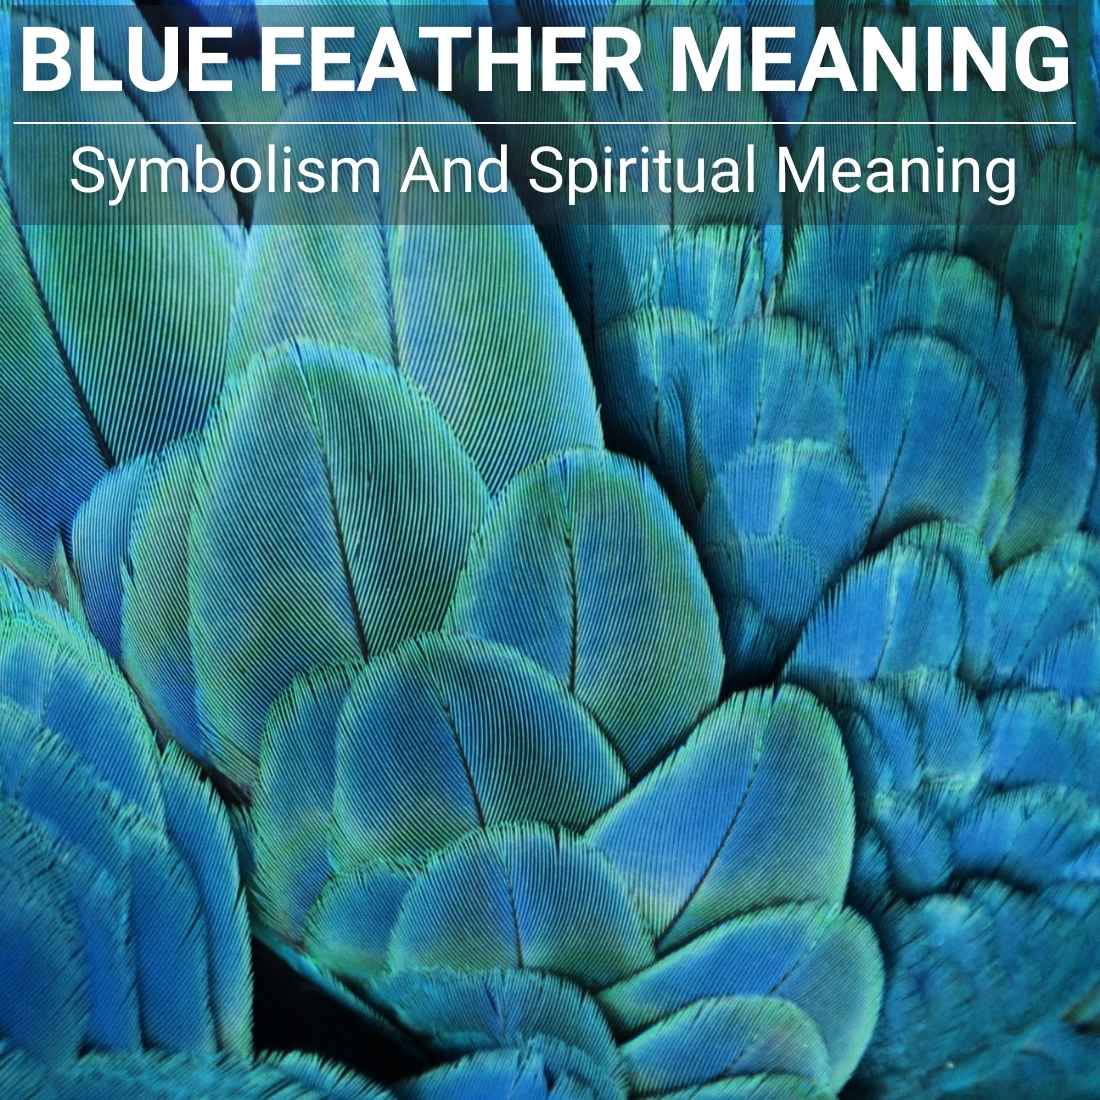 Blue Feather Meaning